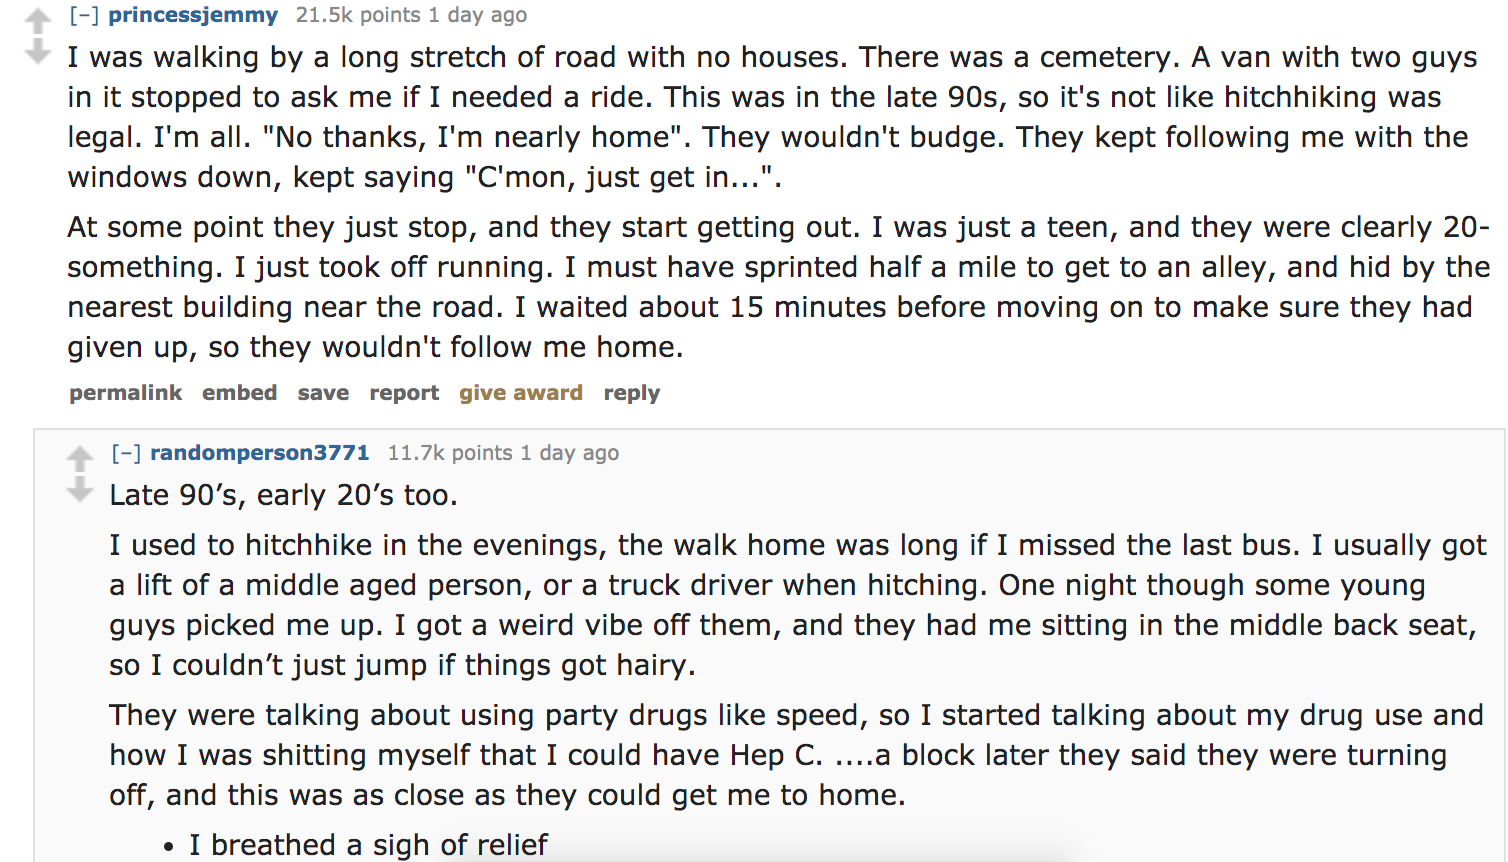 Ask Reddit - I was walking by a long stretch of road with no houses. There was a cemetery. A van with two guys in it stopped to ask me if I needed a ride. This was in the late 90s, so it's not hitchhiking was legal. I'm all.